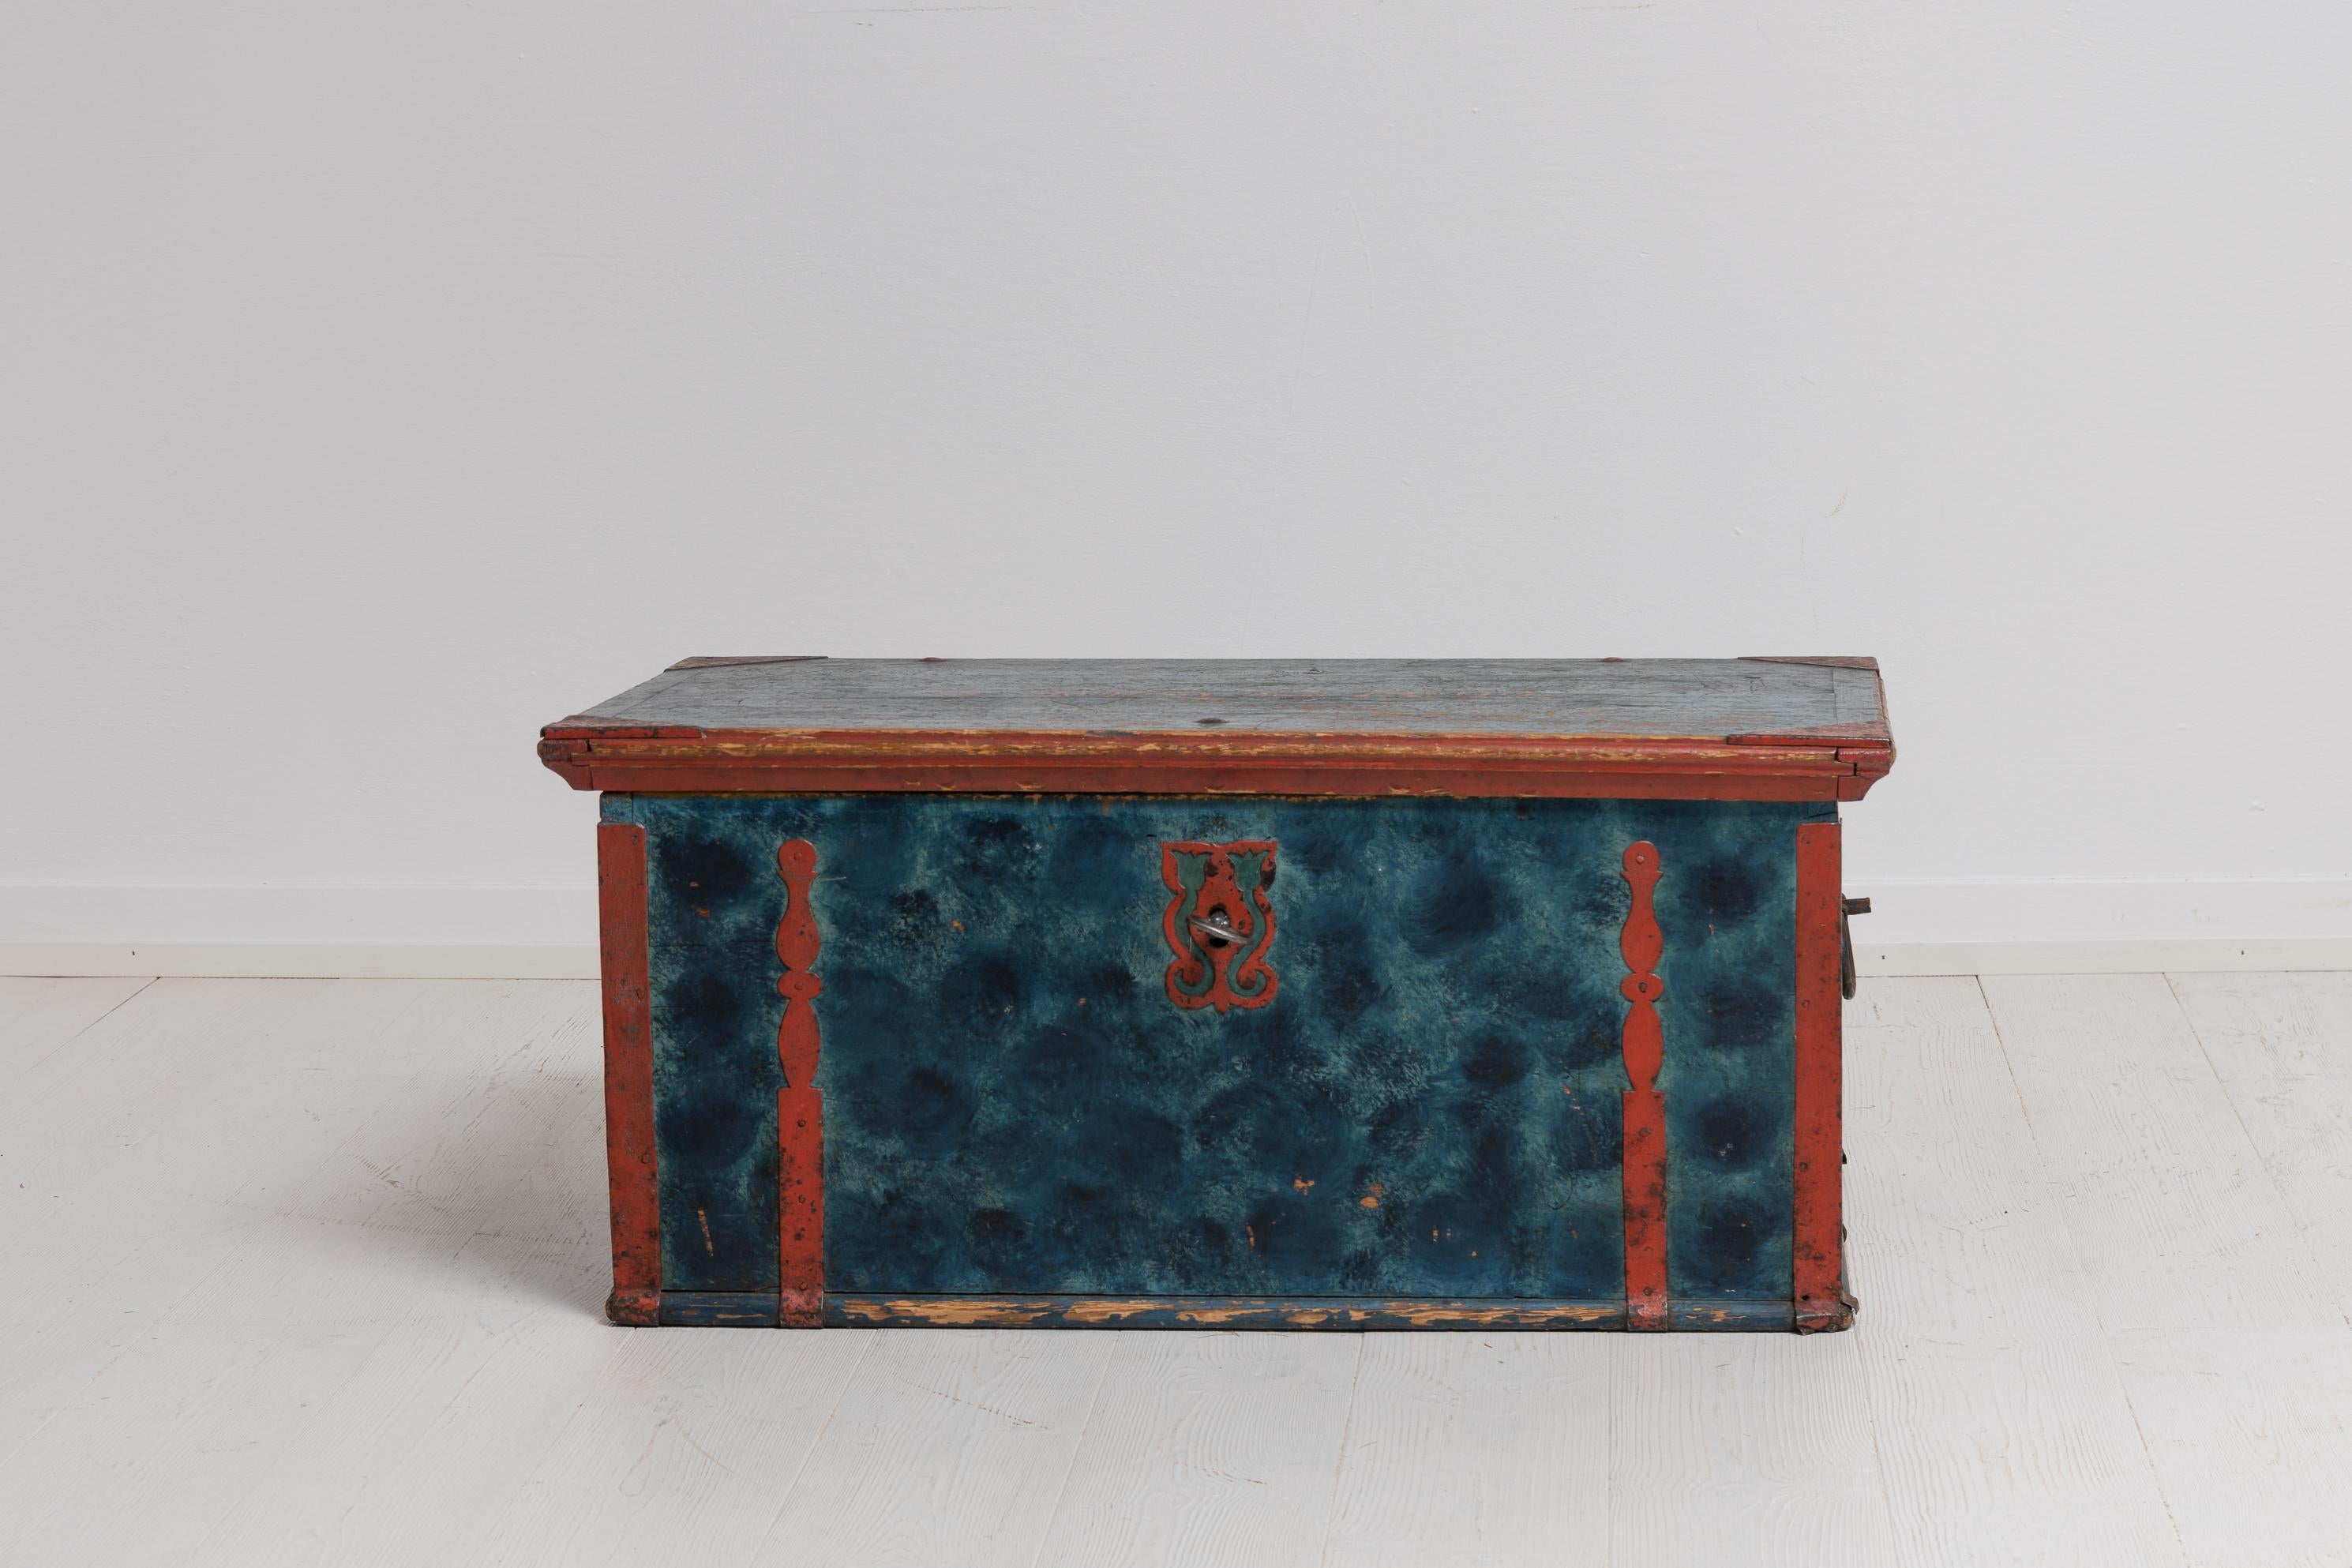 Blue folk art chest made in Swedish pine. The chest from northern Sweden and has hand wrought reinforcements in iron. The chest is unusually painted with blue faux paint which is also the original first layer of paint. Dated 1822 and with painted